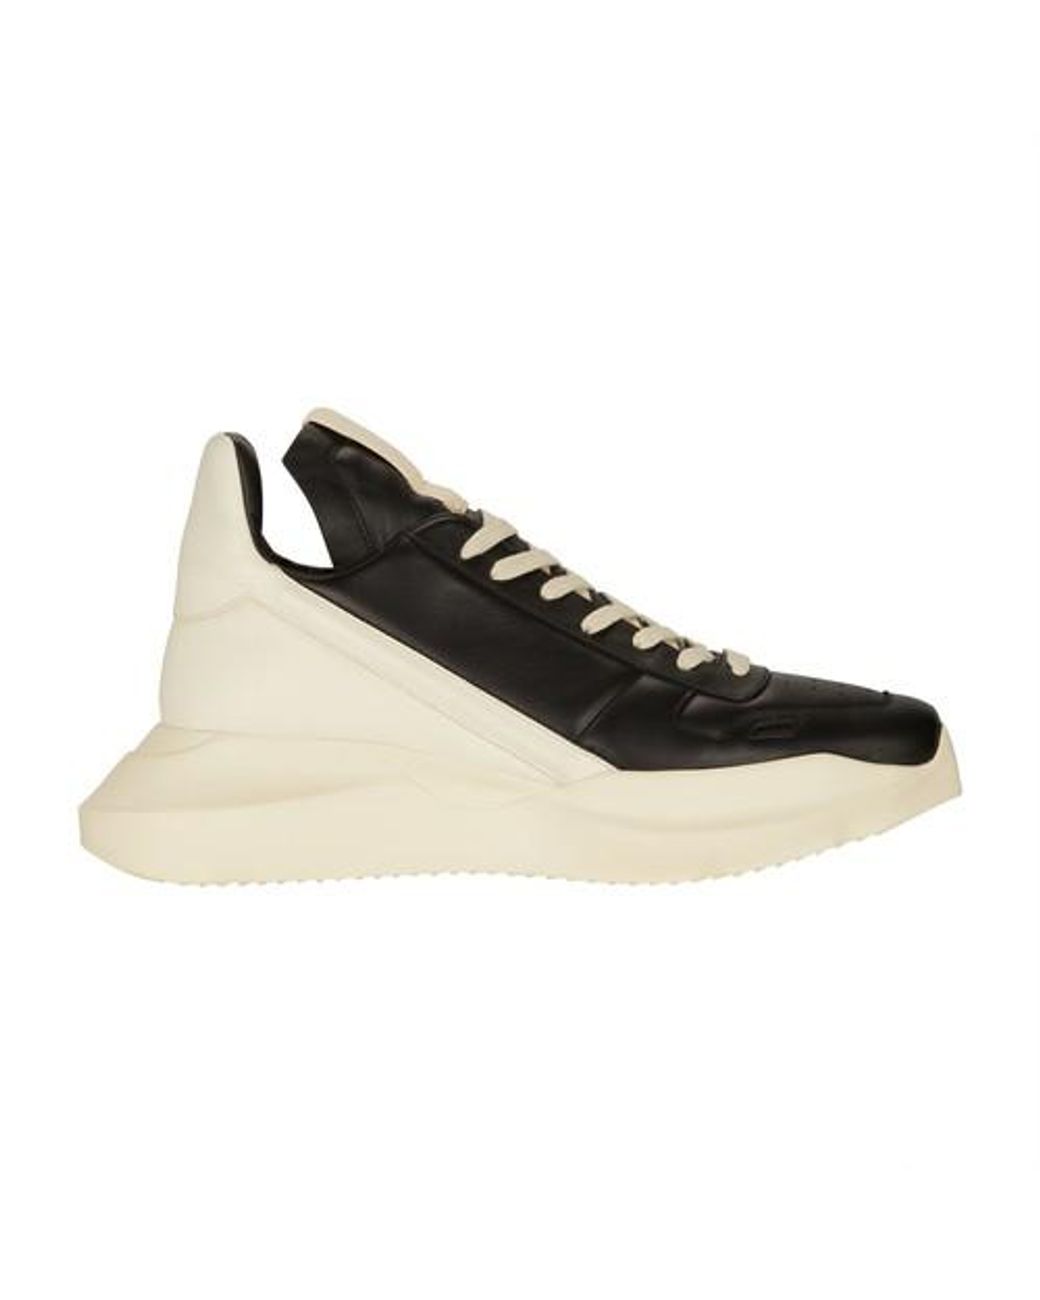 Rick Owens Leather Geth Runner Sneakers for Men - Lyst